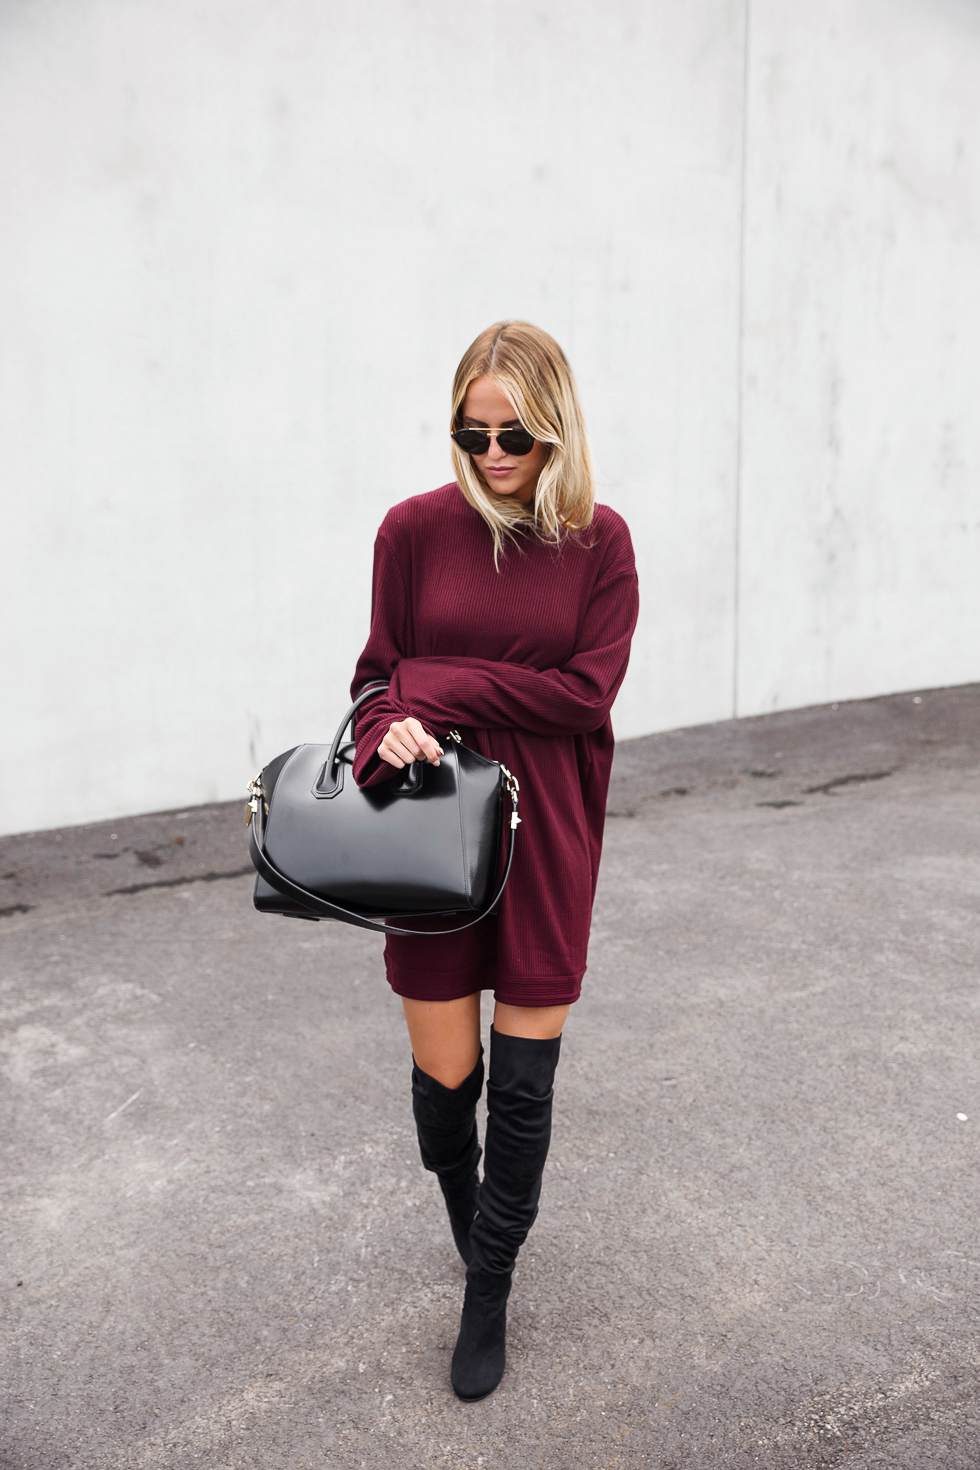 15 Awesome Burgundy Outfits That Will Catch Your Attention